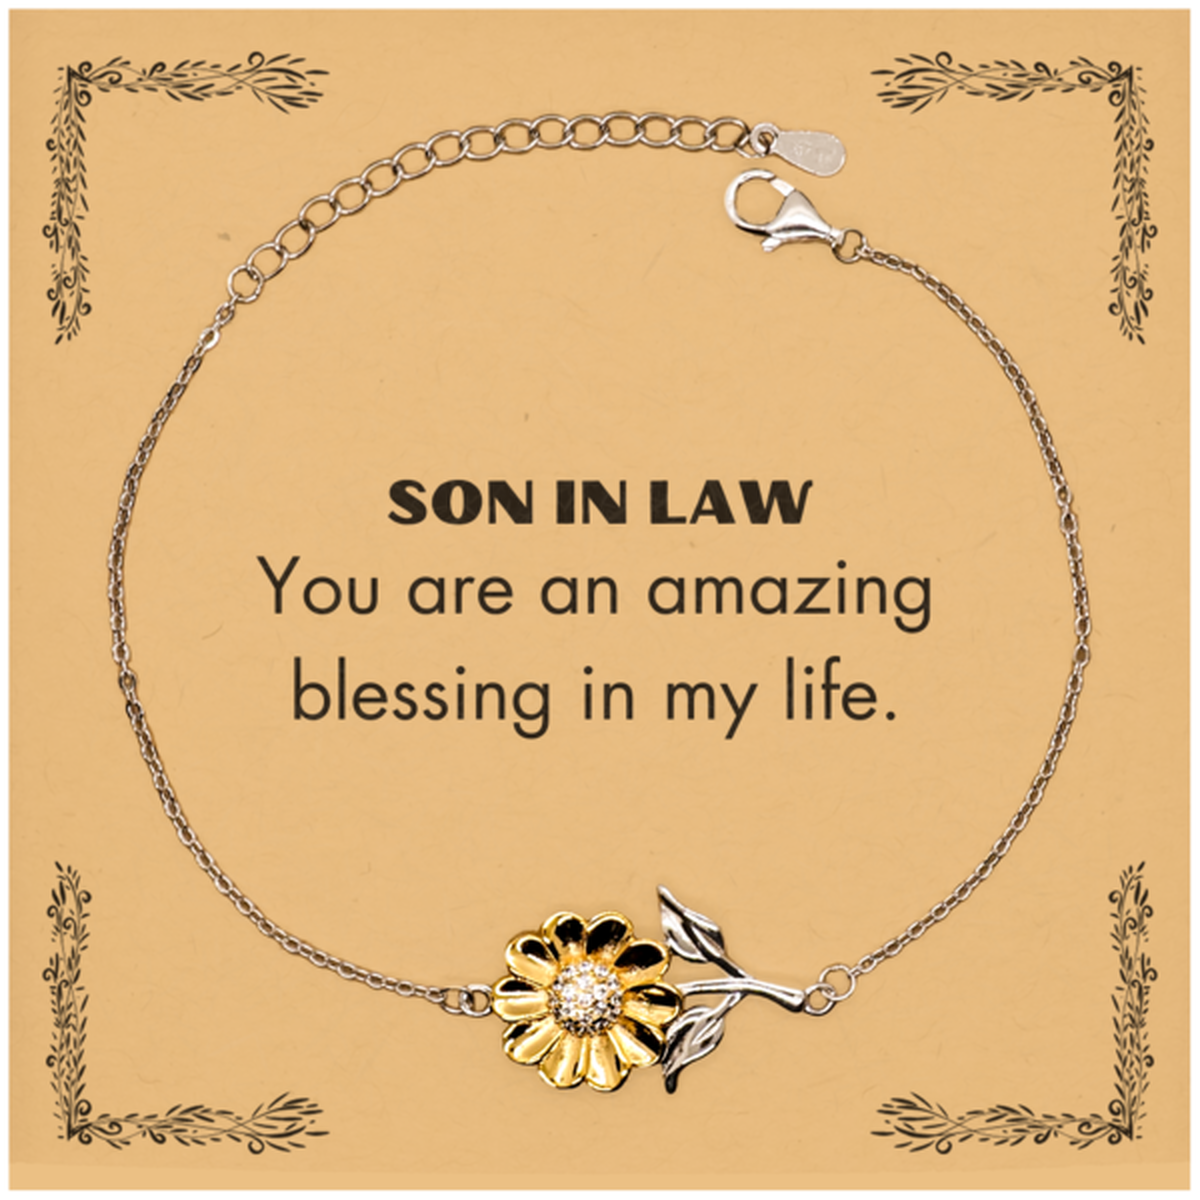 Son In Law Sunflower Bracelet, You are an amazing blessing in my life, Thank You Gifts For Son In Law, Inspirational Birthday Christmas Unique Gifts For Son In Law